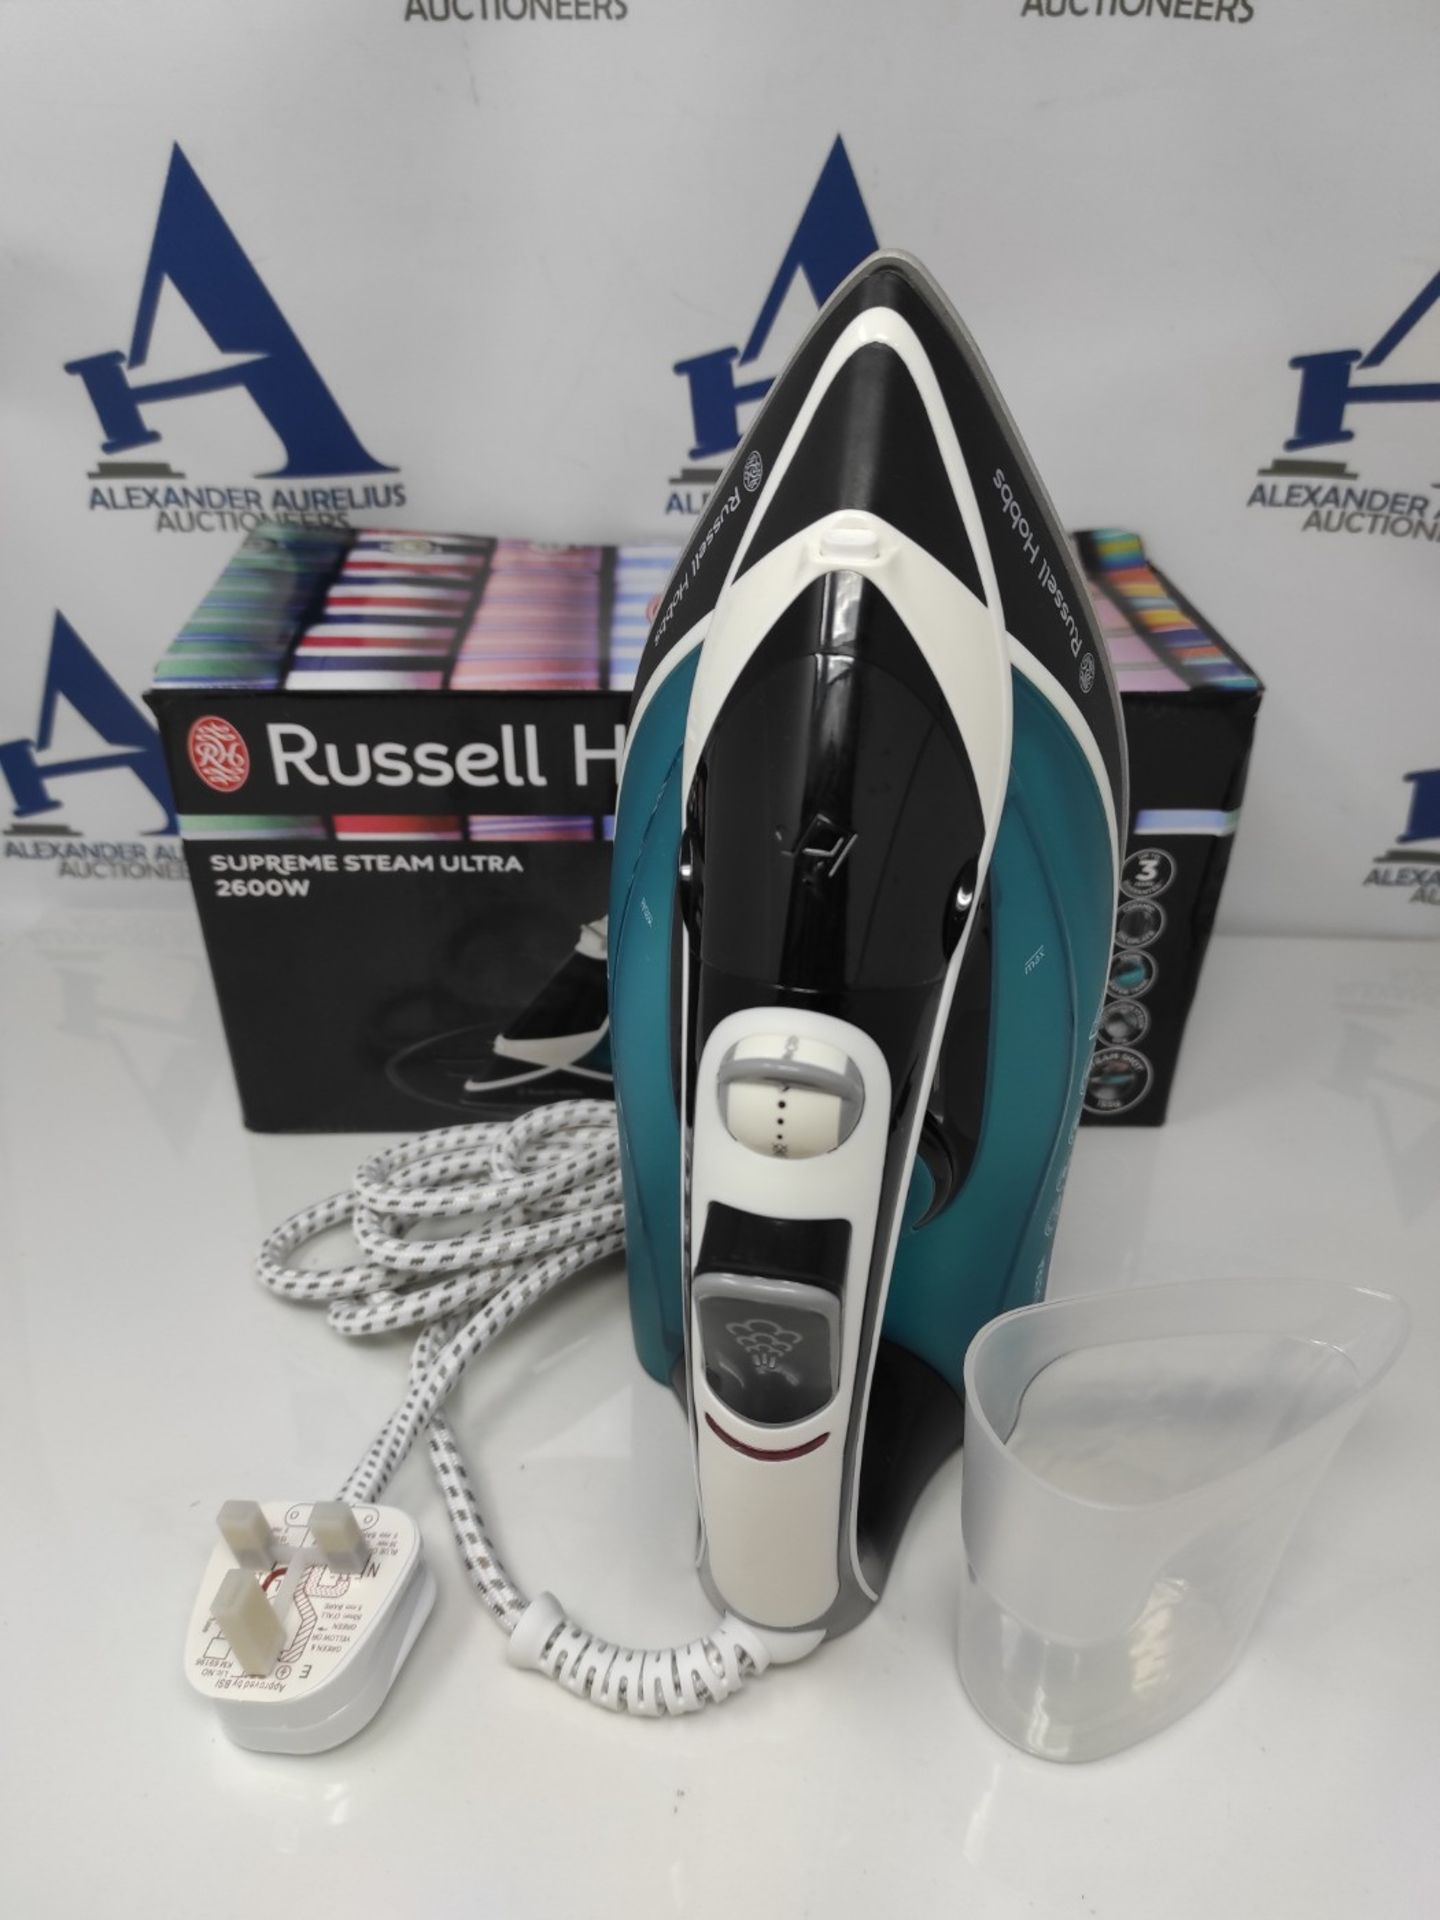 RRP £80.00 Russell Hobbs Supreme Steam Traditional Iron 23260, 2600 W - Teal/Black - Image 3 of 3